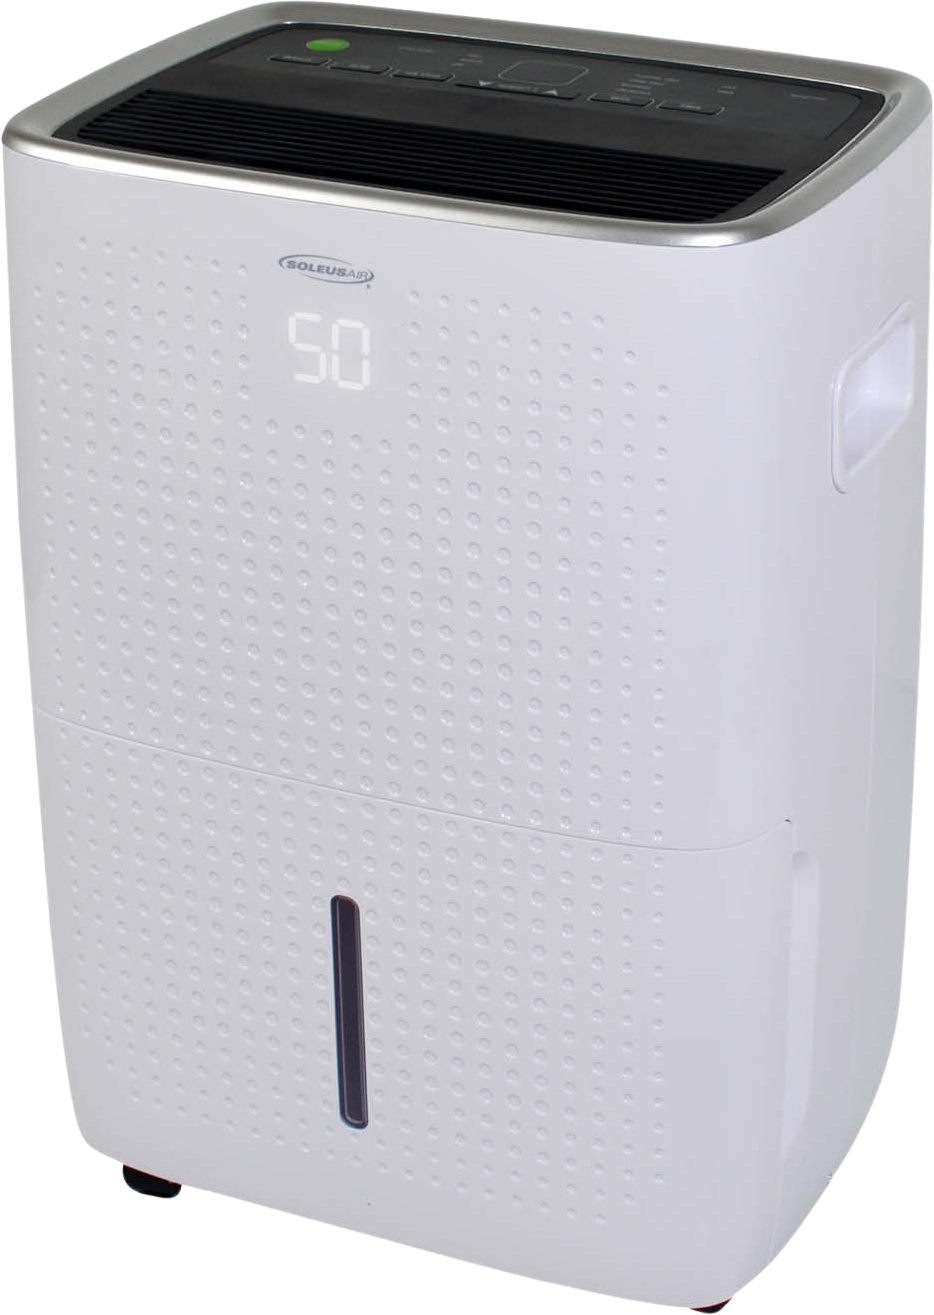 Soleus Air, Soleus Air DSJ-35E-01 Dehumidifier 35 Pint with Mirage Display Continuous Drainage Outlet 3.3 Amp New